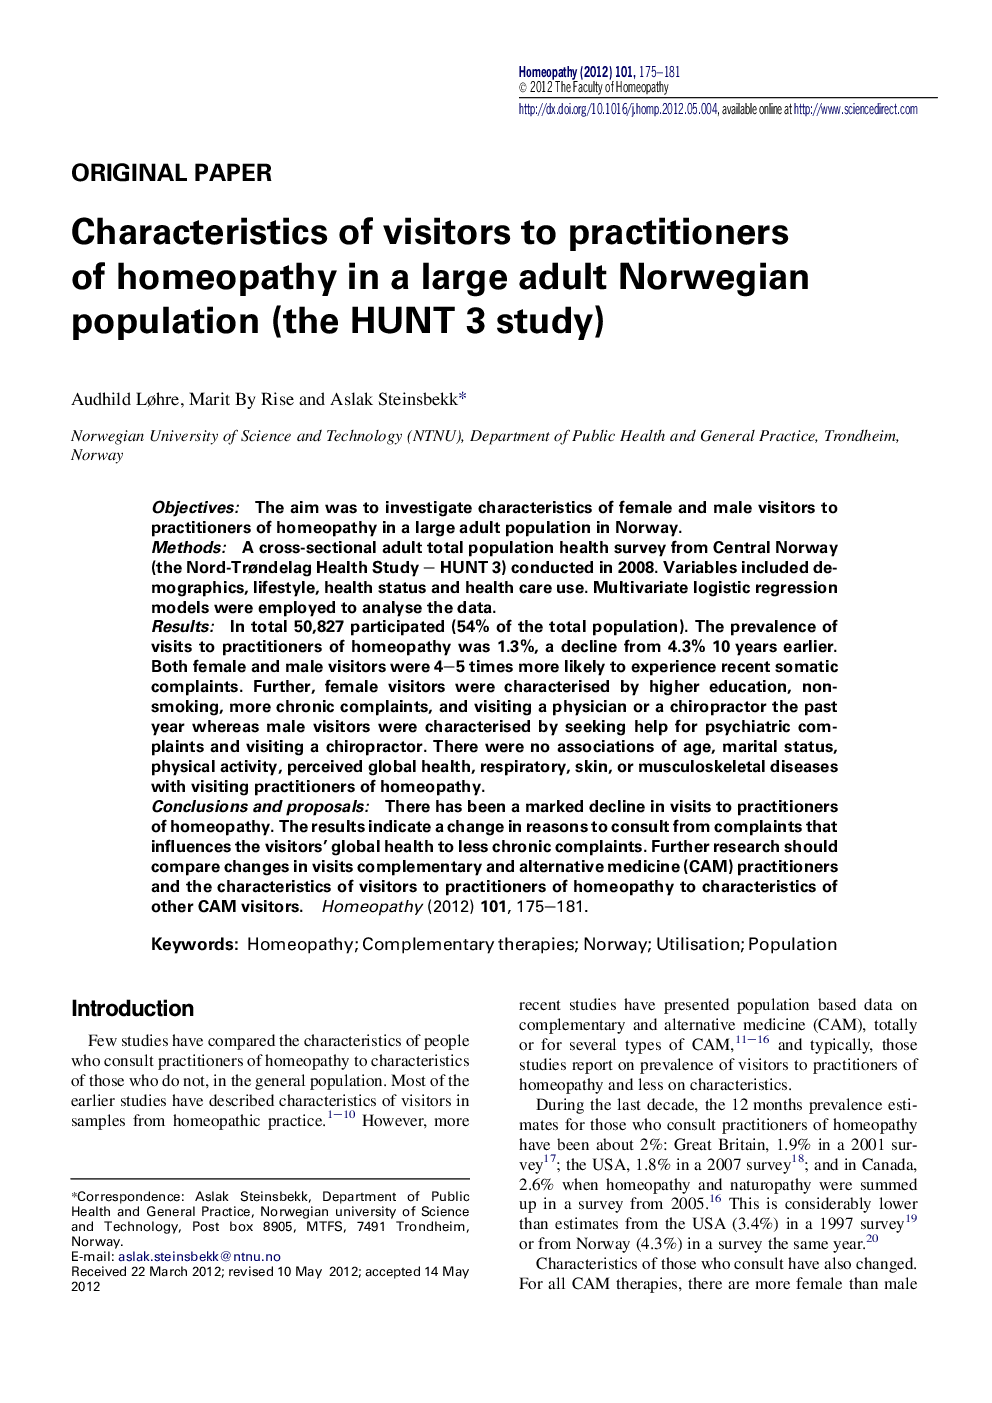 Characteristics of visitors to practitioners of homeopathy in a large adult Norwegian population (the HUNT 3 study)